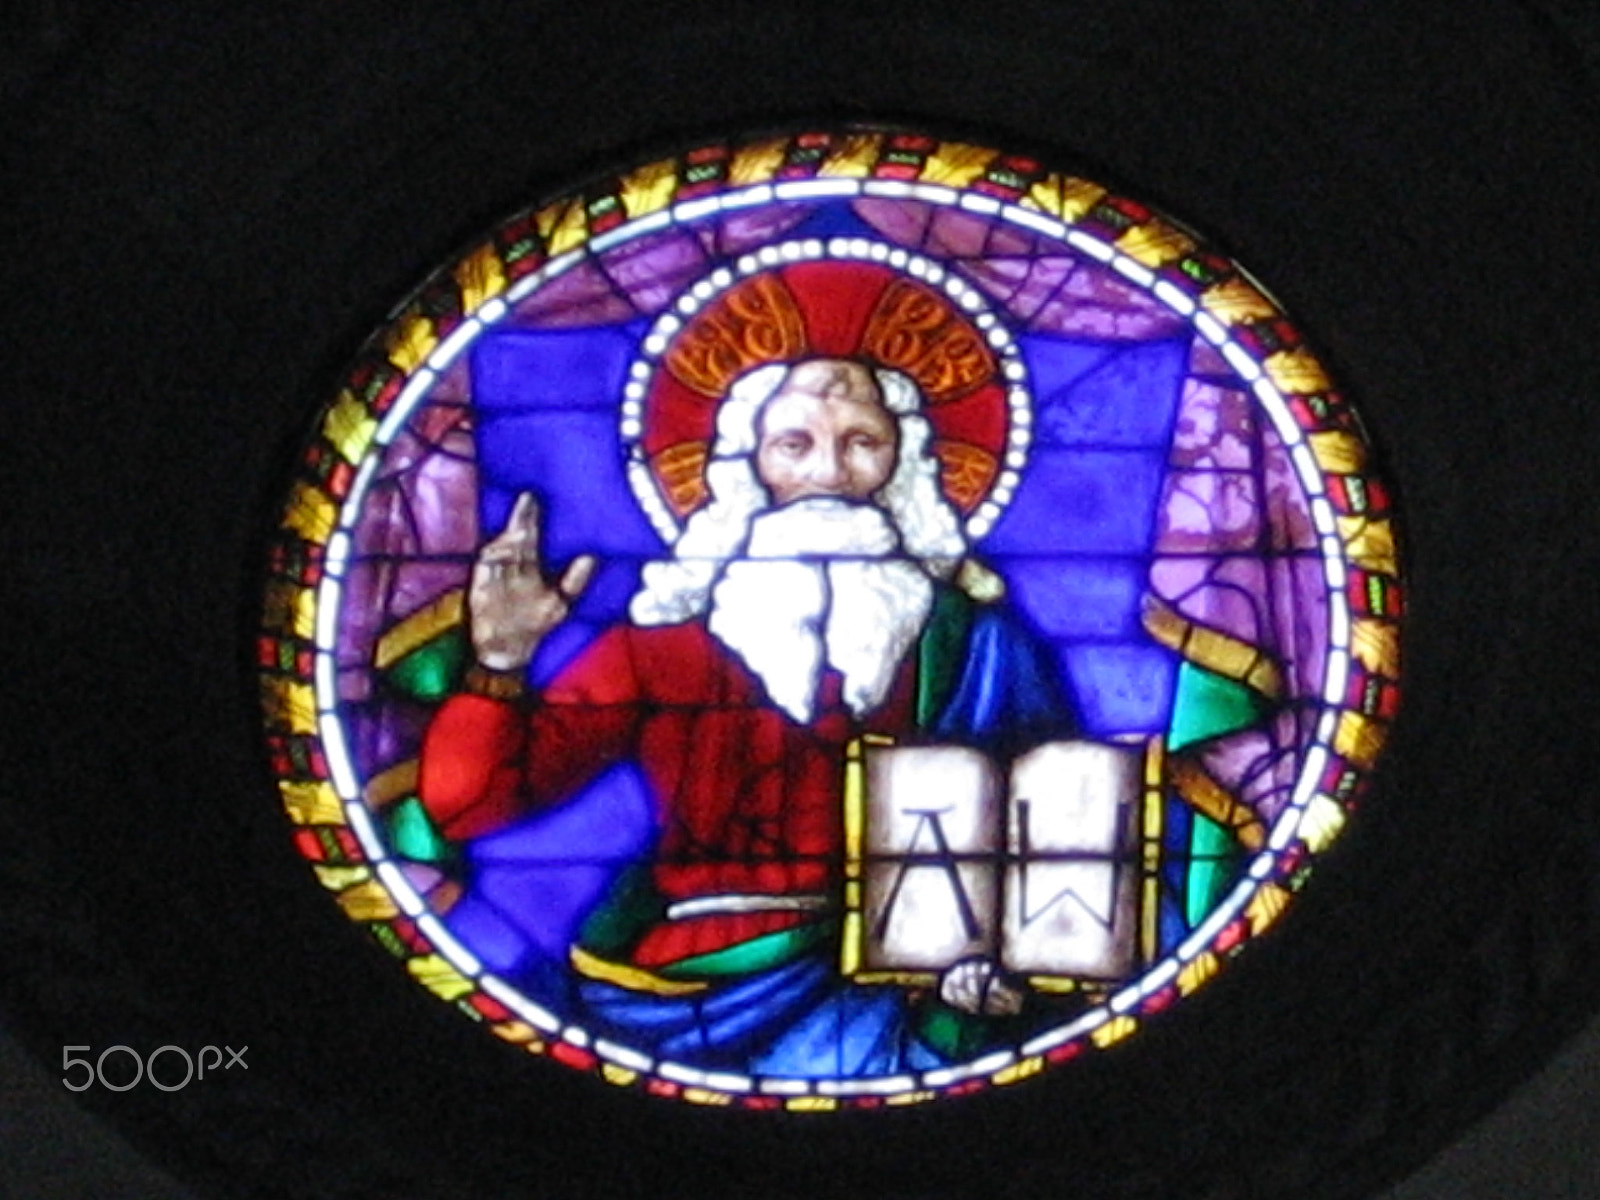 Canon POWERSHOT A95 sample photo. Stained glass photography